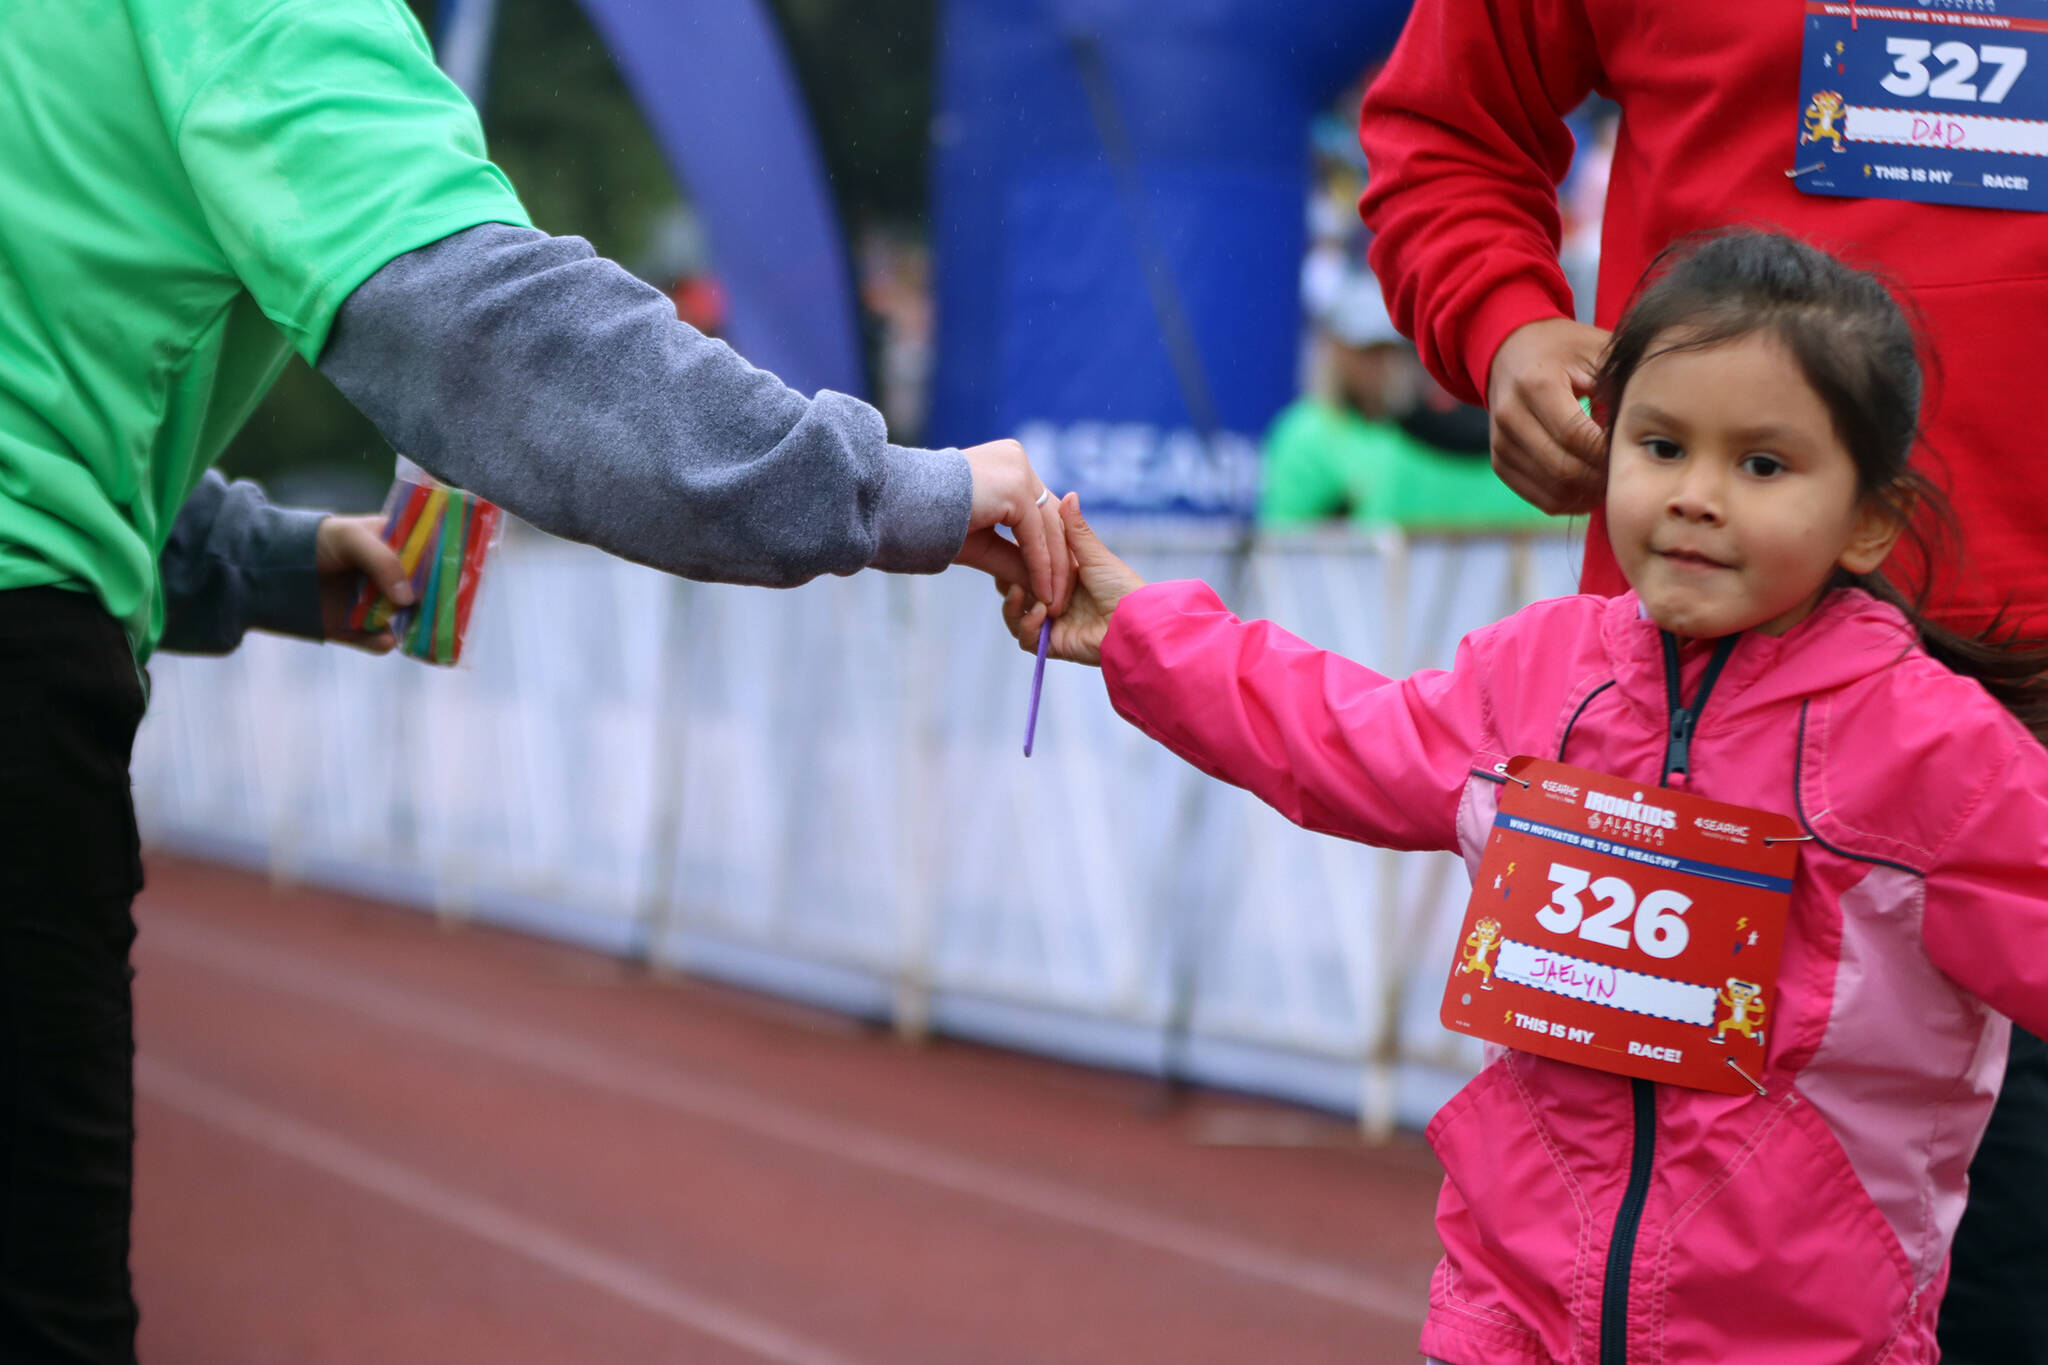 Jaelyn Jackson, 4, takes a Popsicle stick in stride Saturday at Thunder Mountain High School for the Ironkids Alaska event. The sticks allowed volunteers to keep track of who had completed their first lap around the track. (Ben Hohenstatt / Juneau Empire)